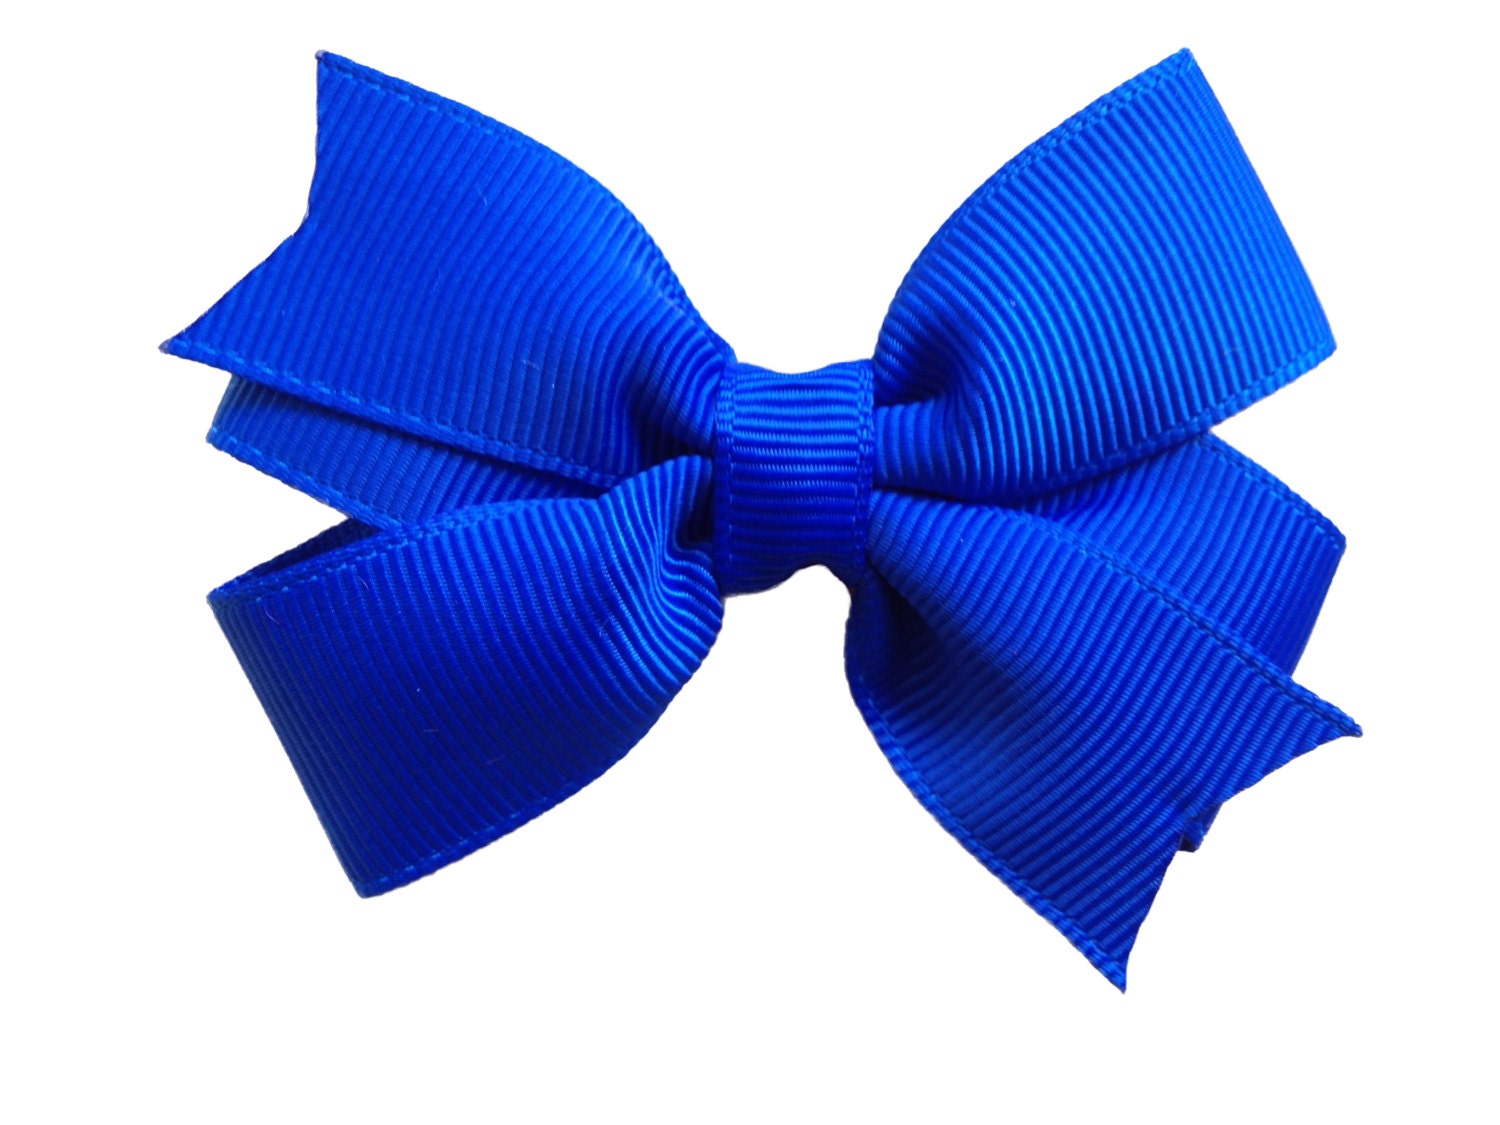 3. Large Royal Blue and Yellow Hair Bow - wide 5